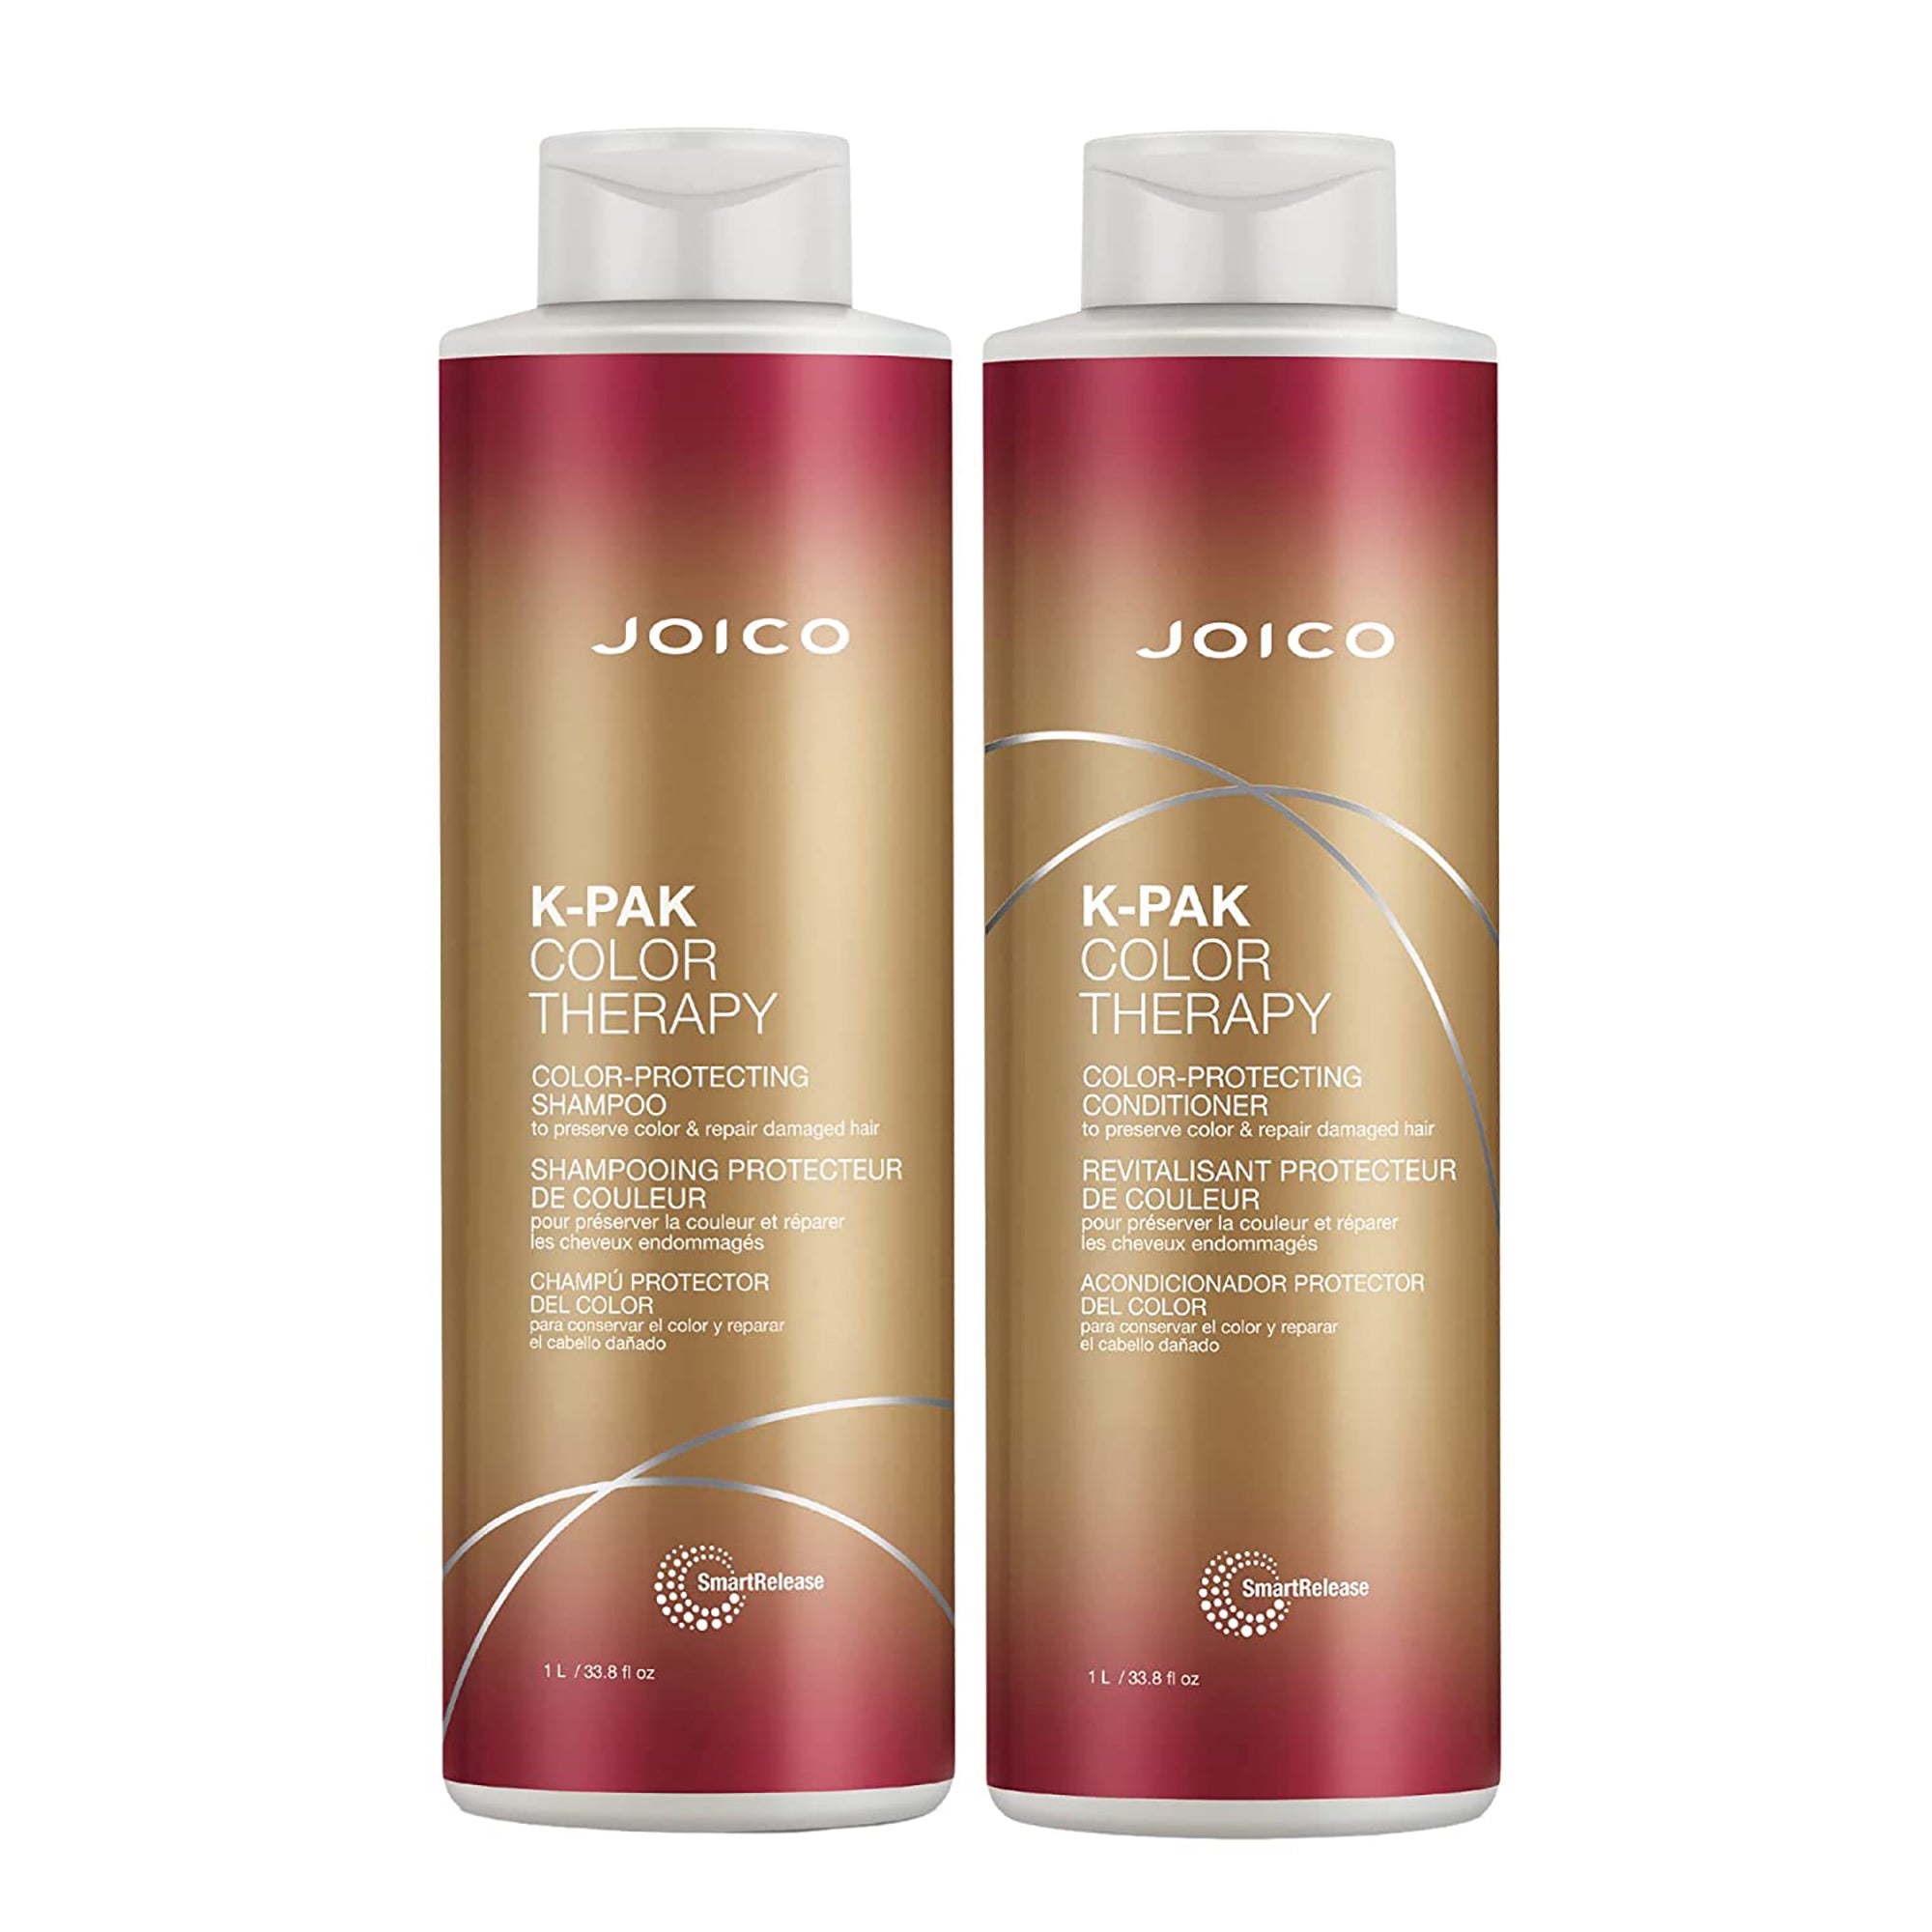 Joico K-Pak Therapy Shampoo and - Planet